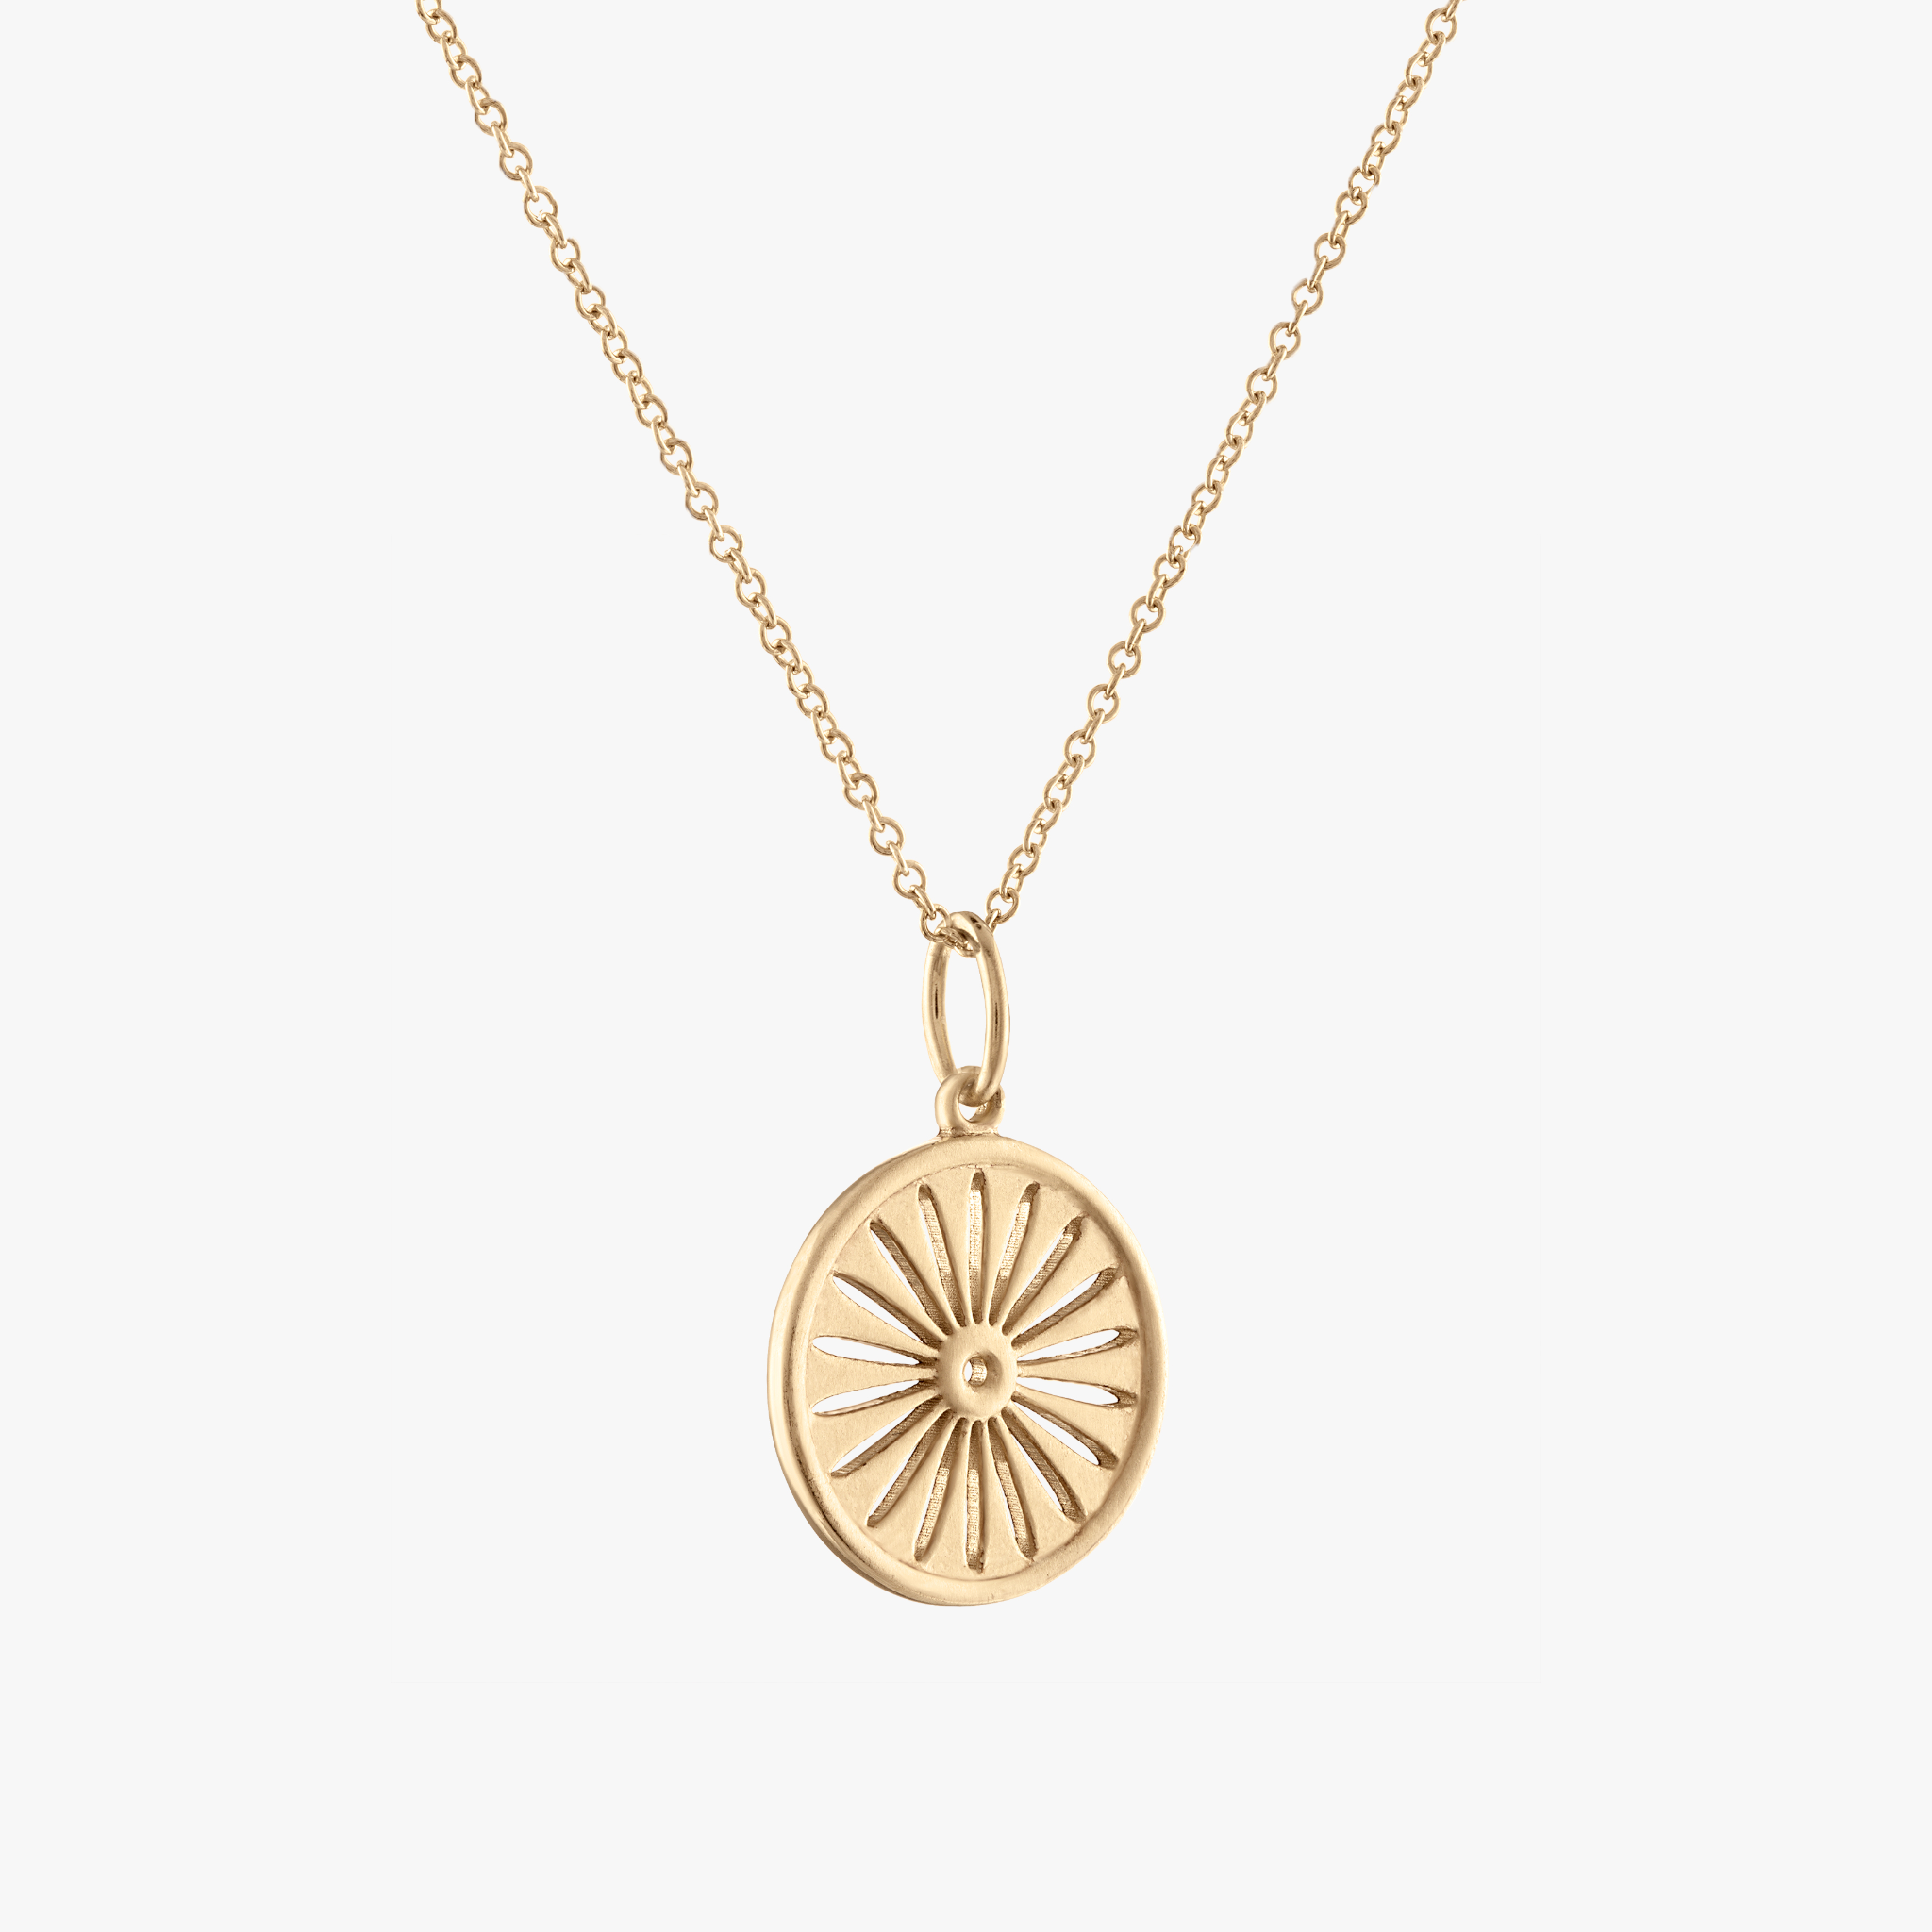 Gold Pendant Necklace - Chloe Necklace | Ana Luisa | Online Jewelry Store  At Prices You'll Love